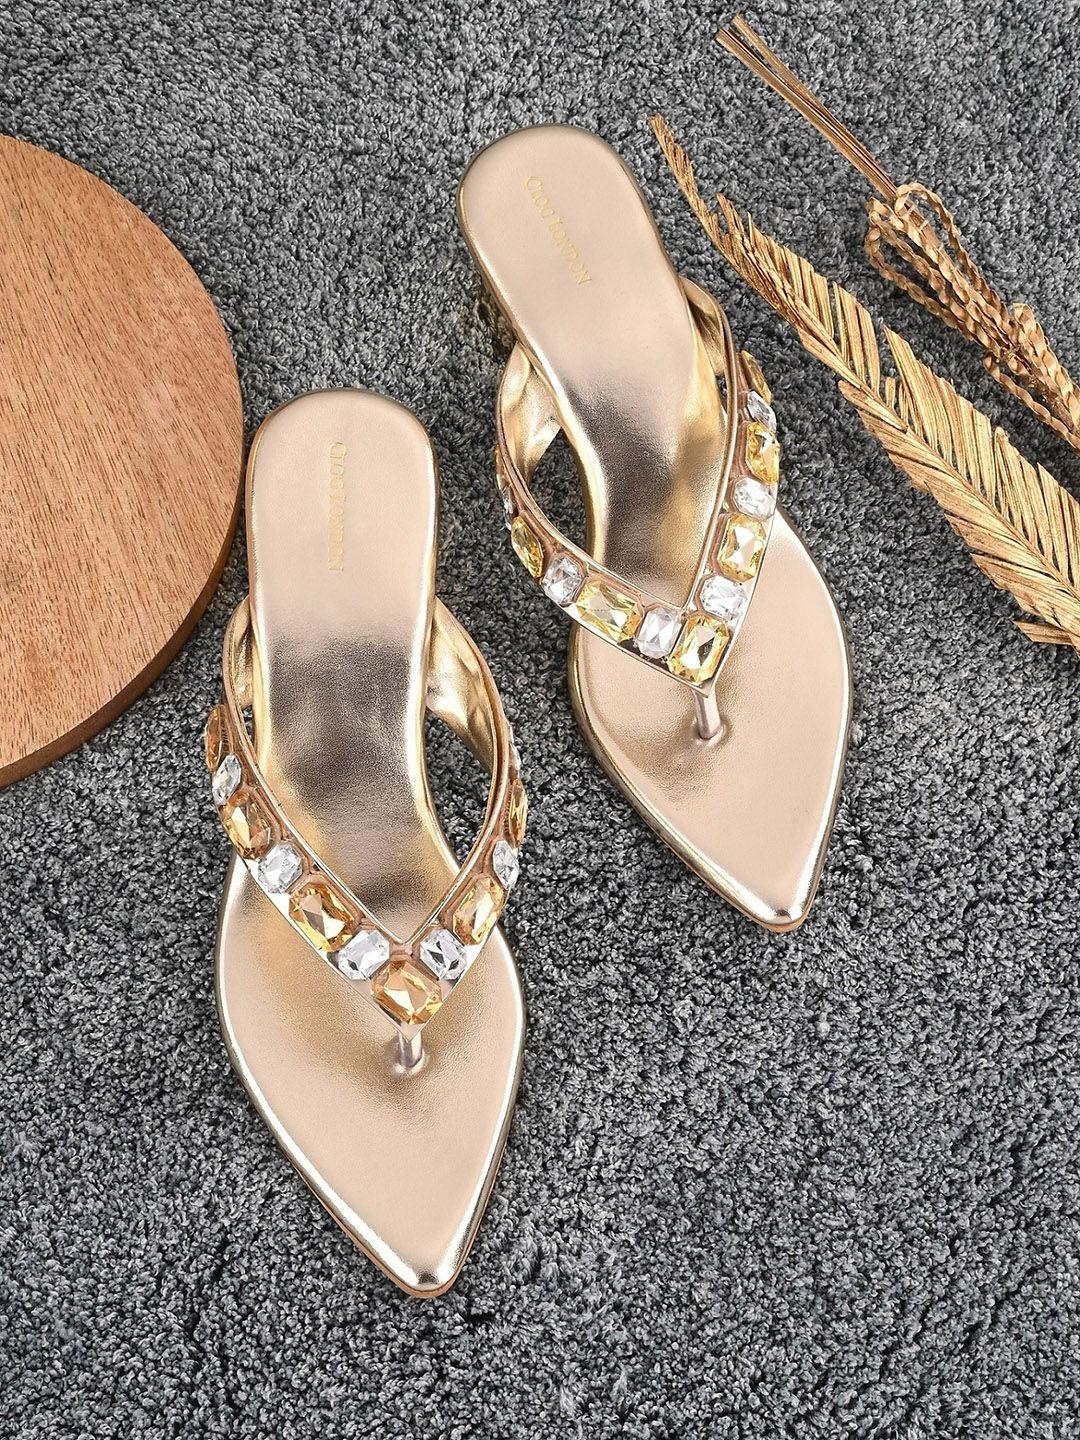 clog london copper-toned embellished wedge with